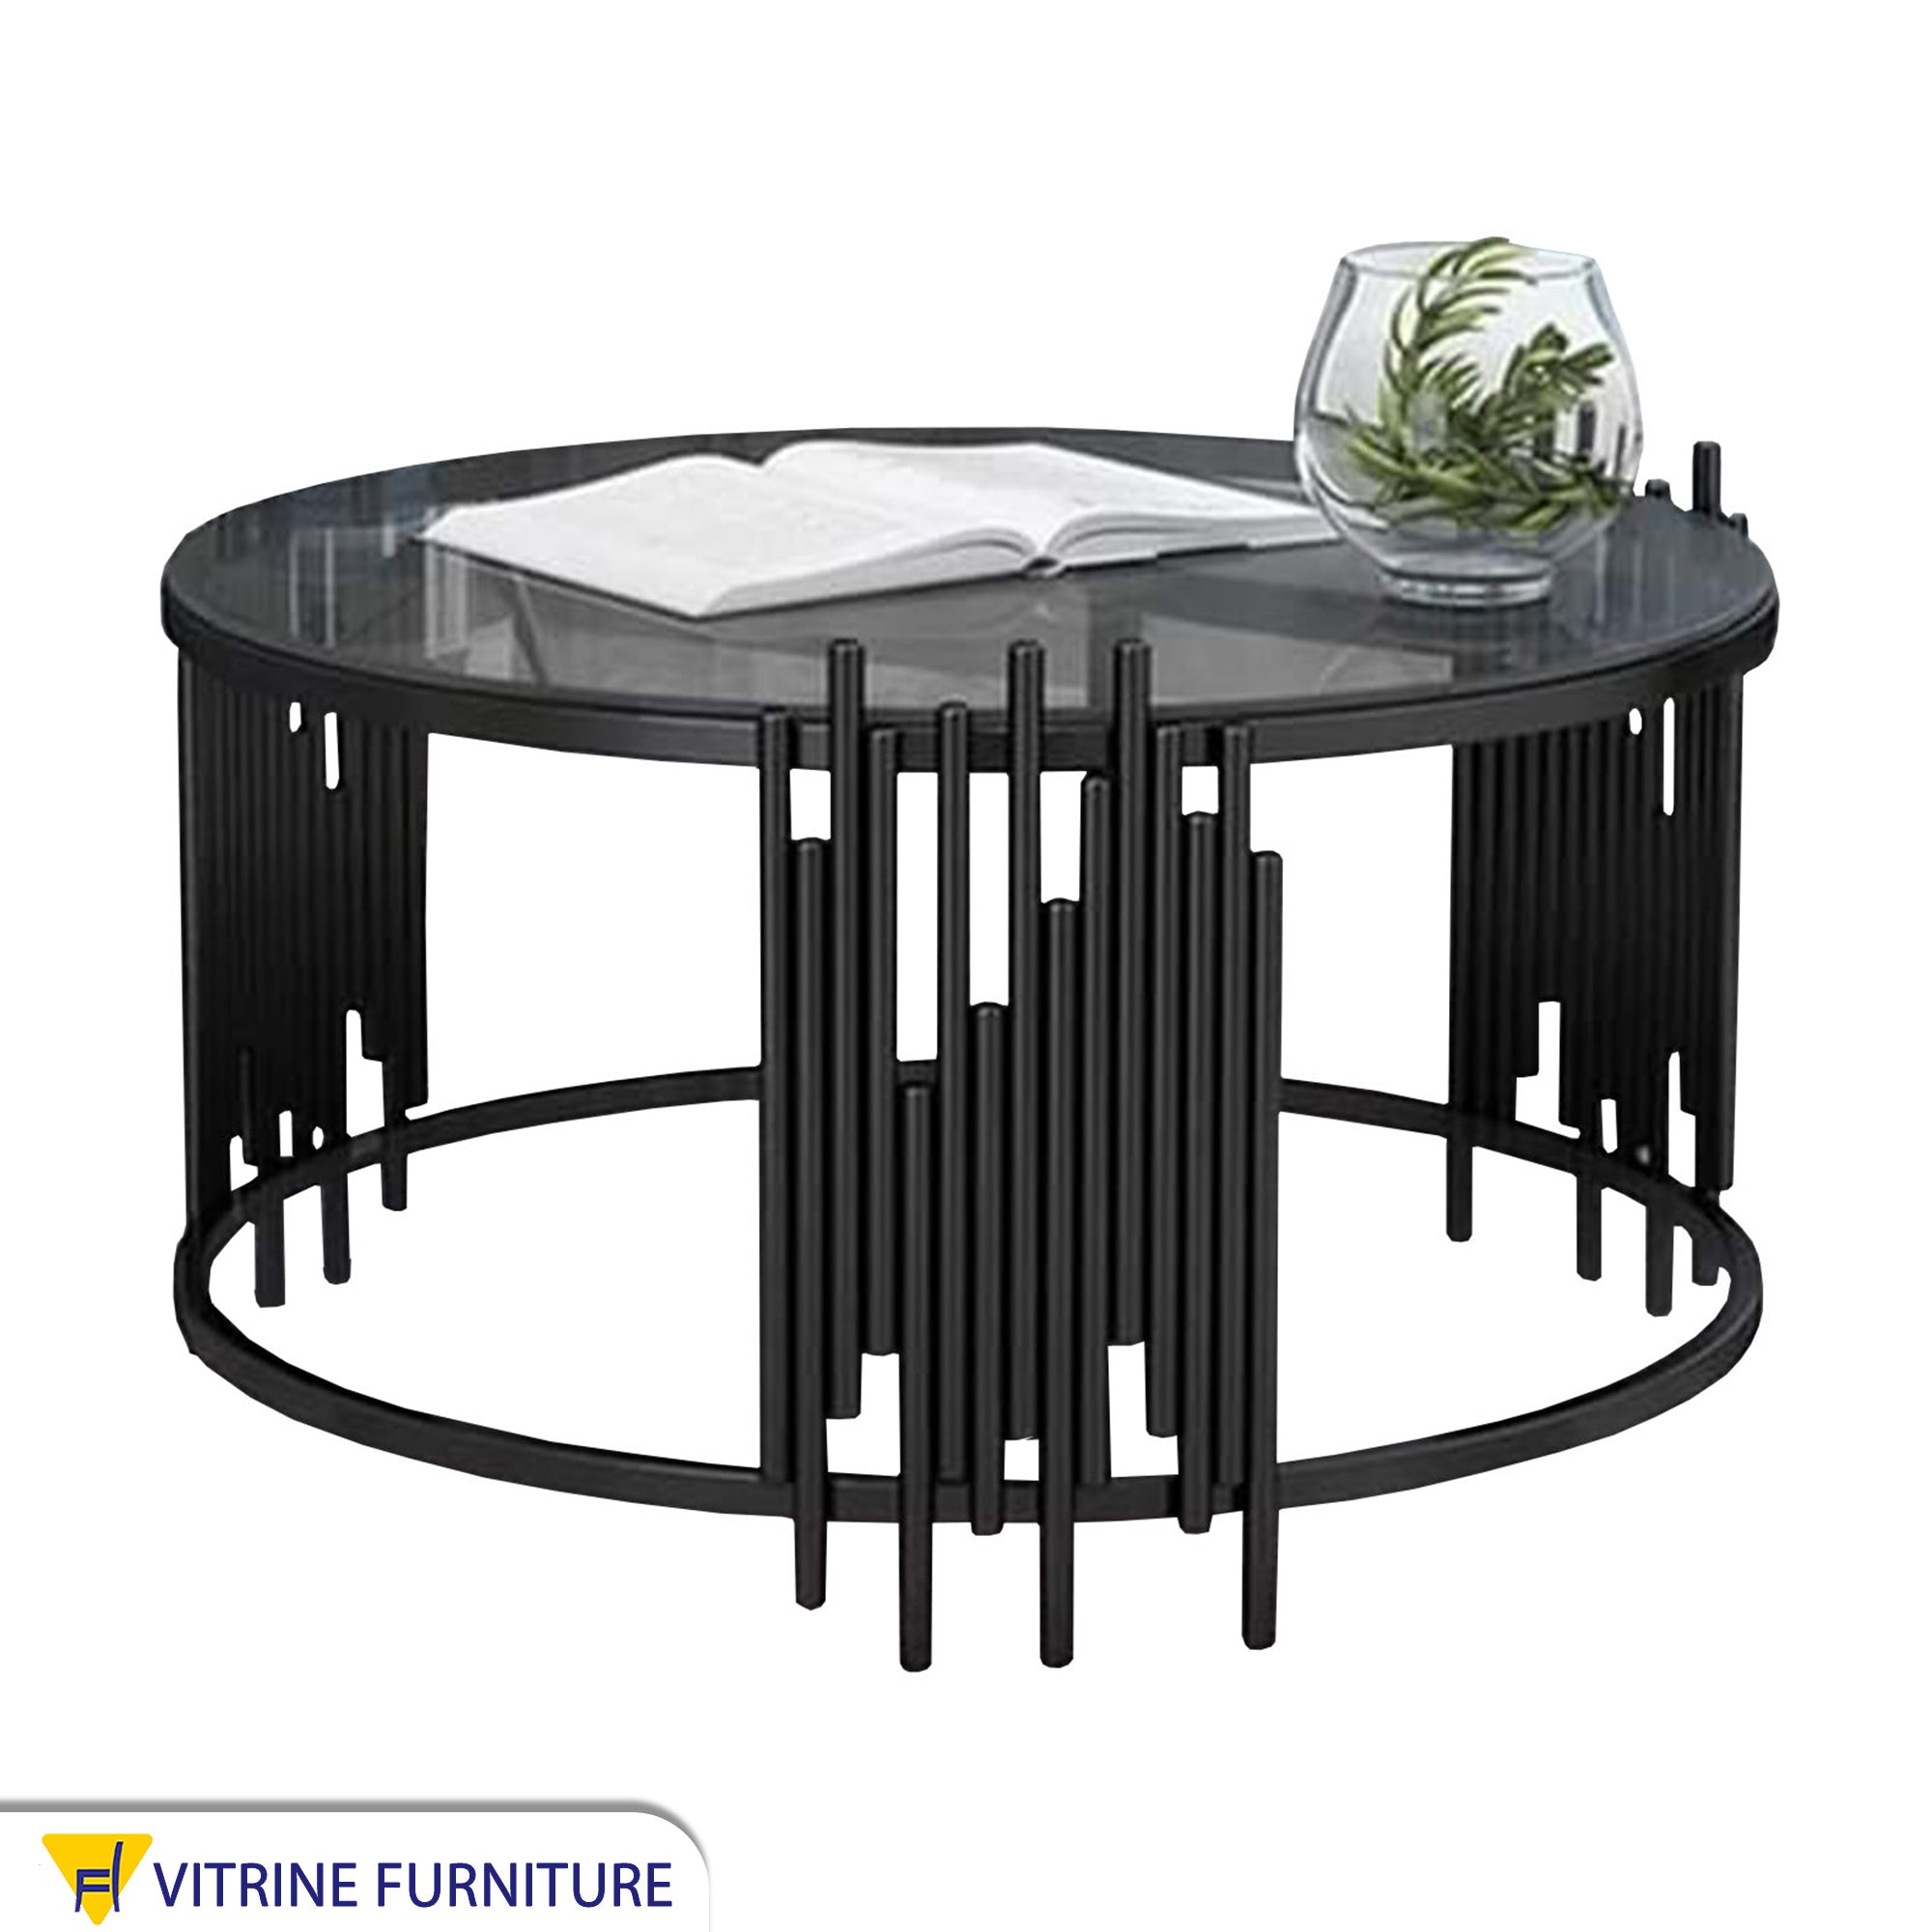 Black iron and glass coffee table